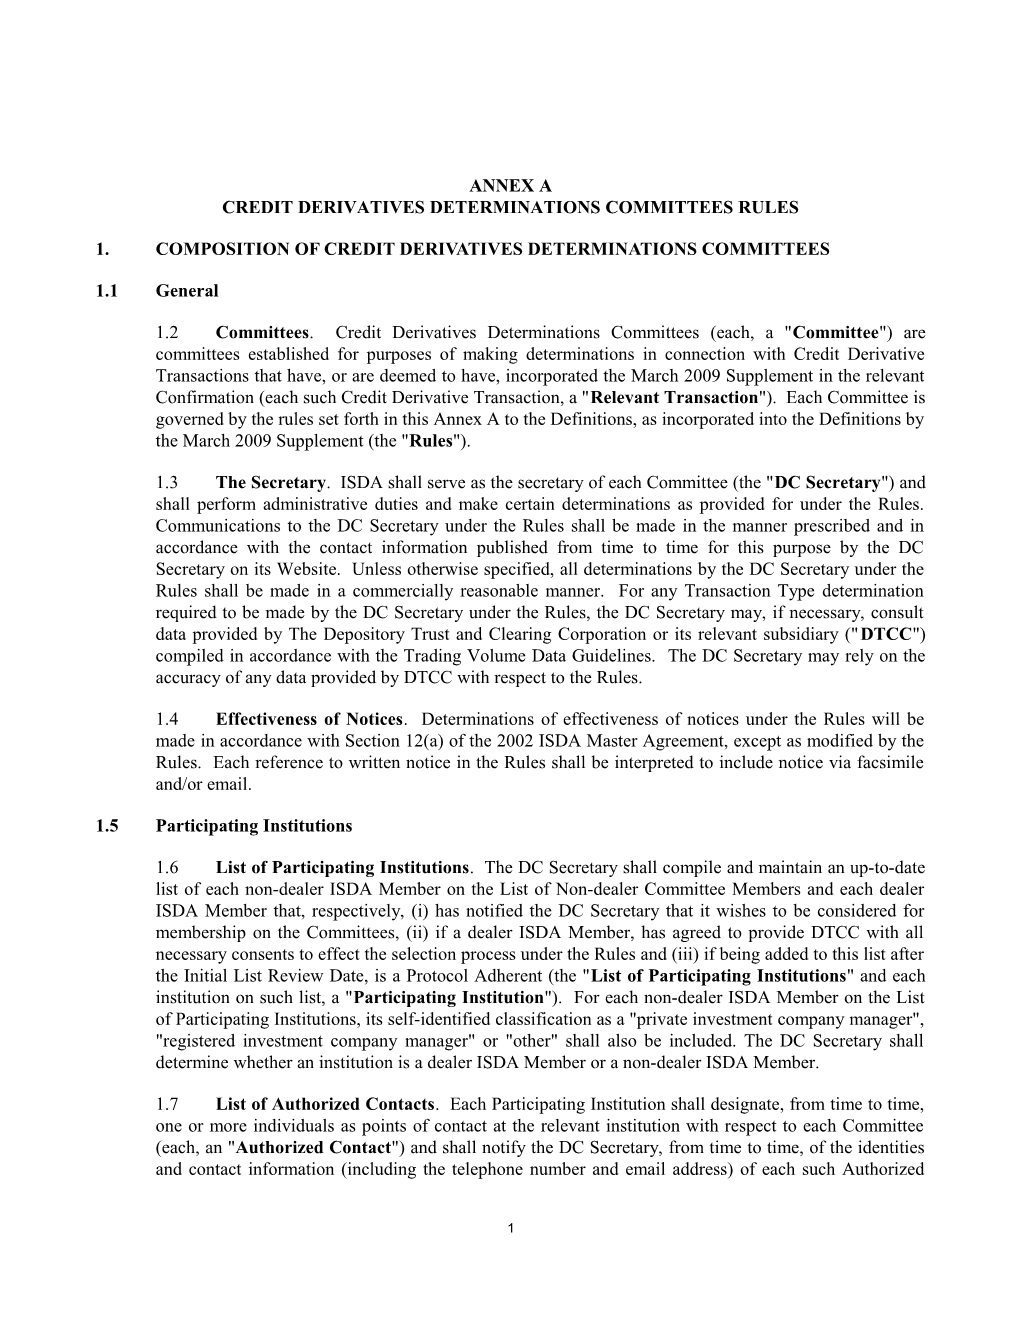 Annexa Credit Derivatives Determinations Committees Rules